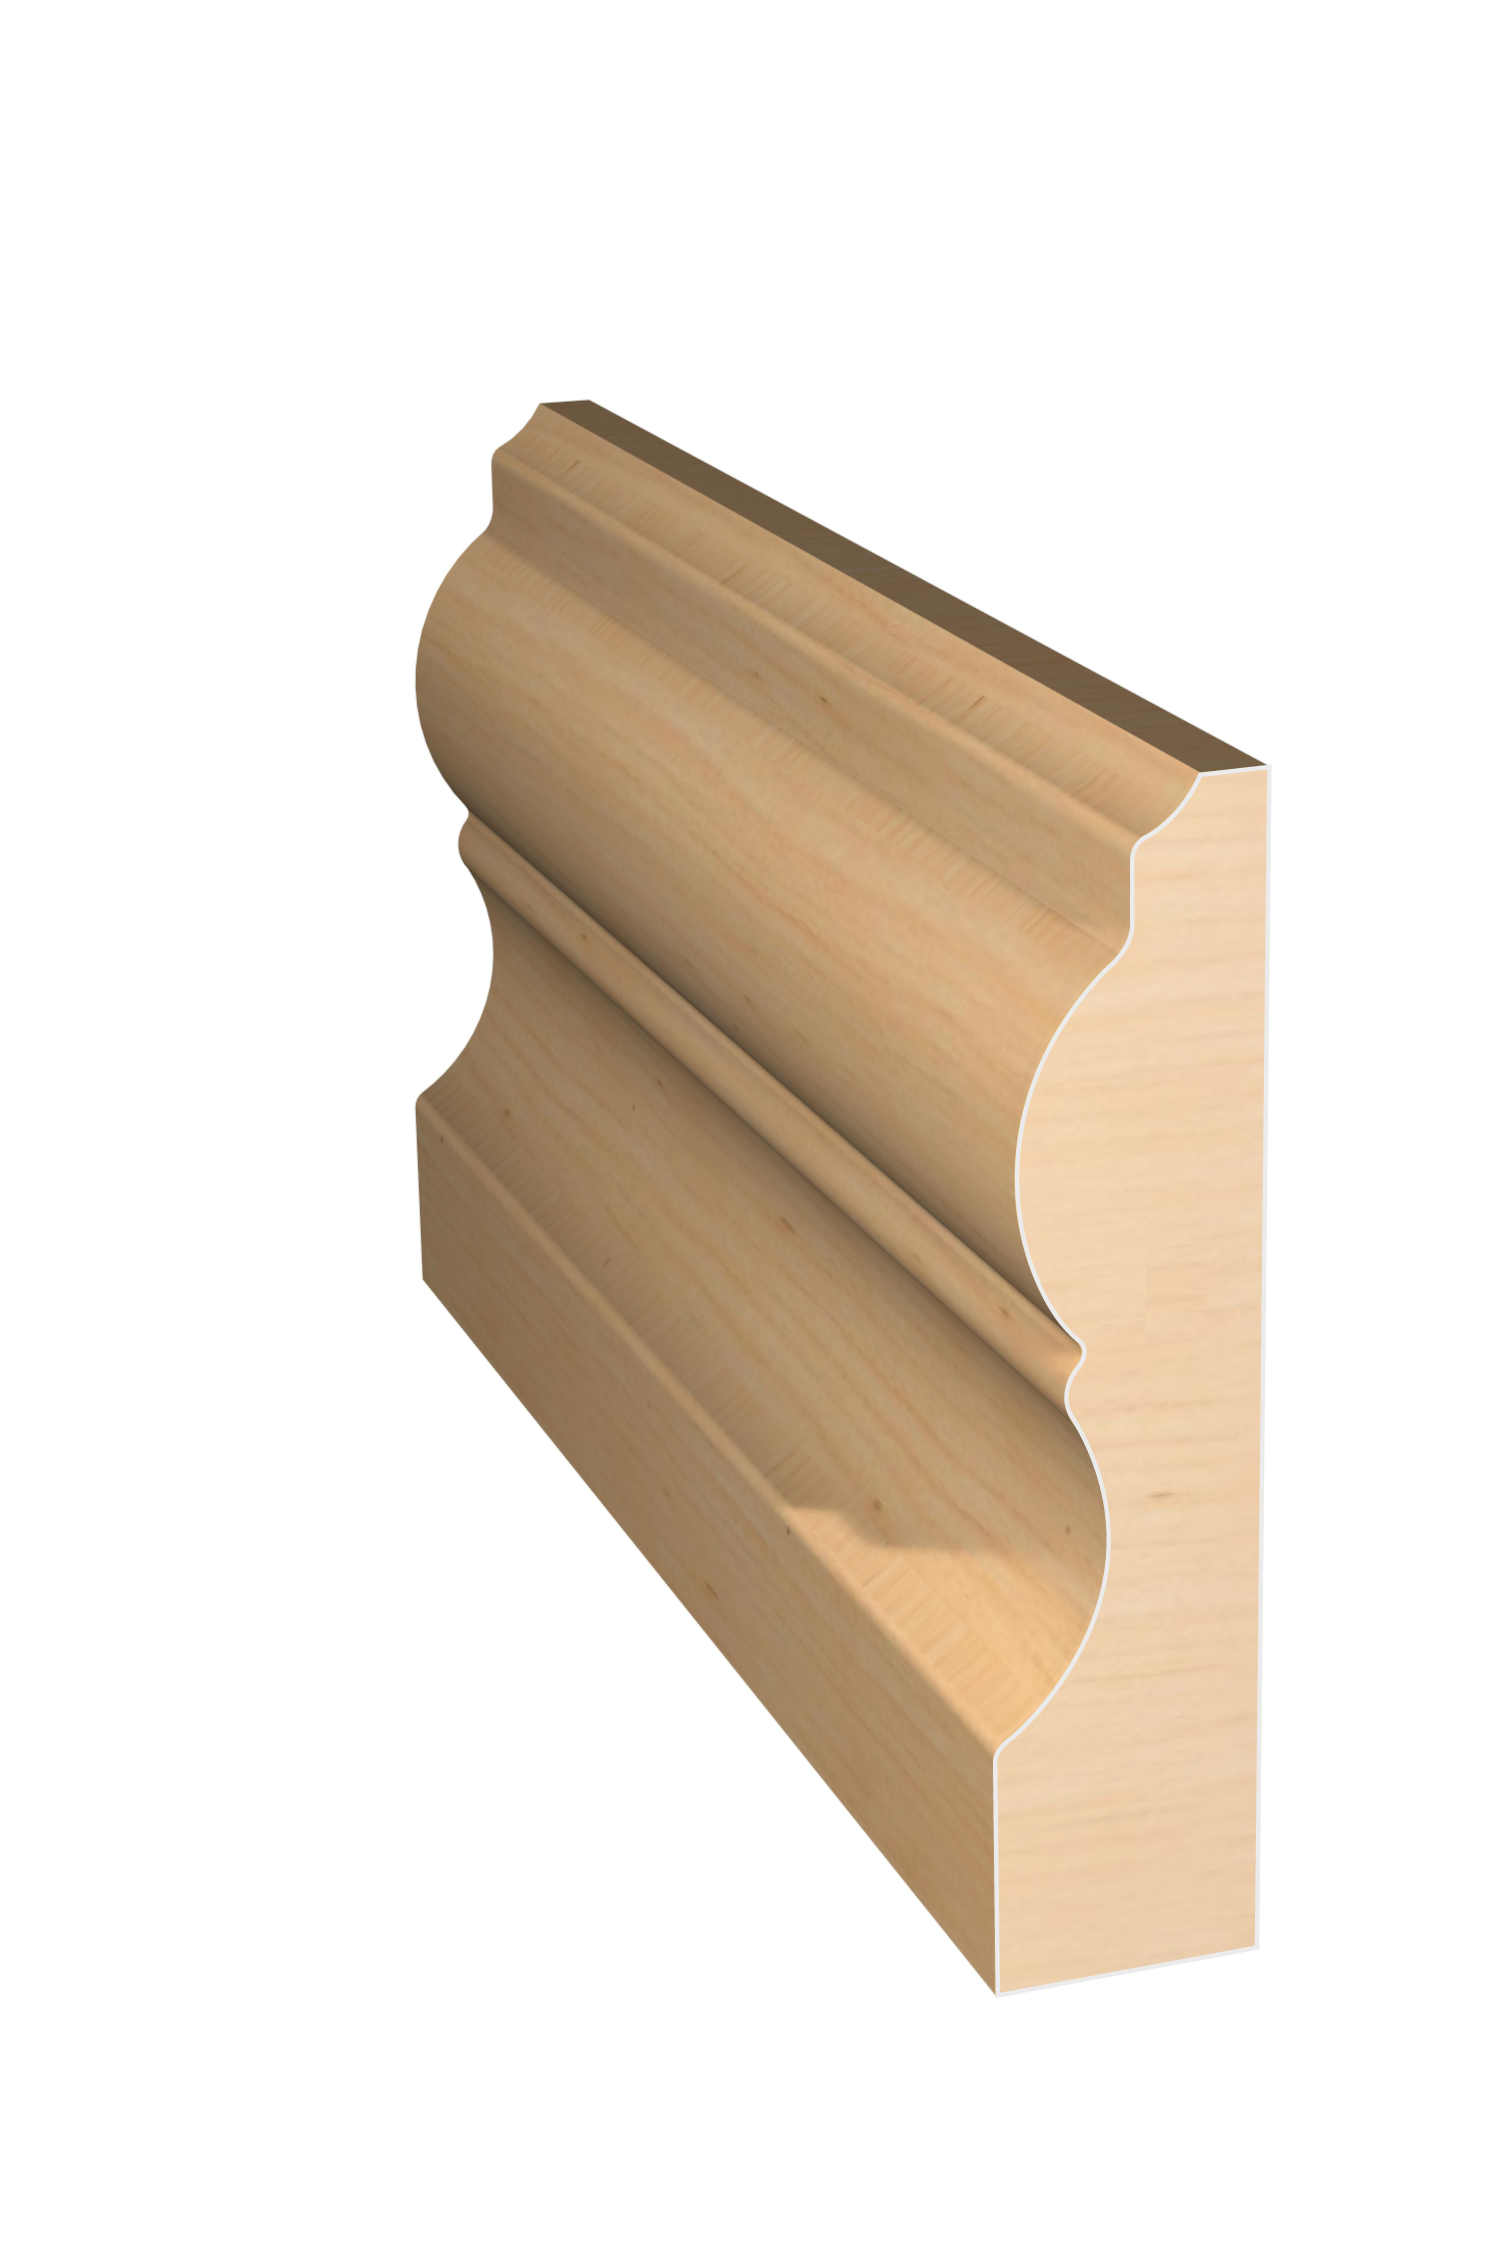 Three dimensional rendering of custom casing wood molding CAPL31433 made by Public Lumber Company in Detroit.